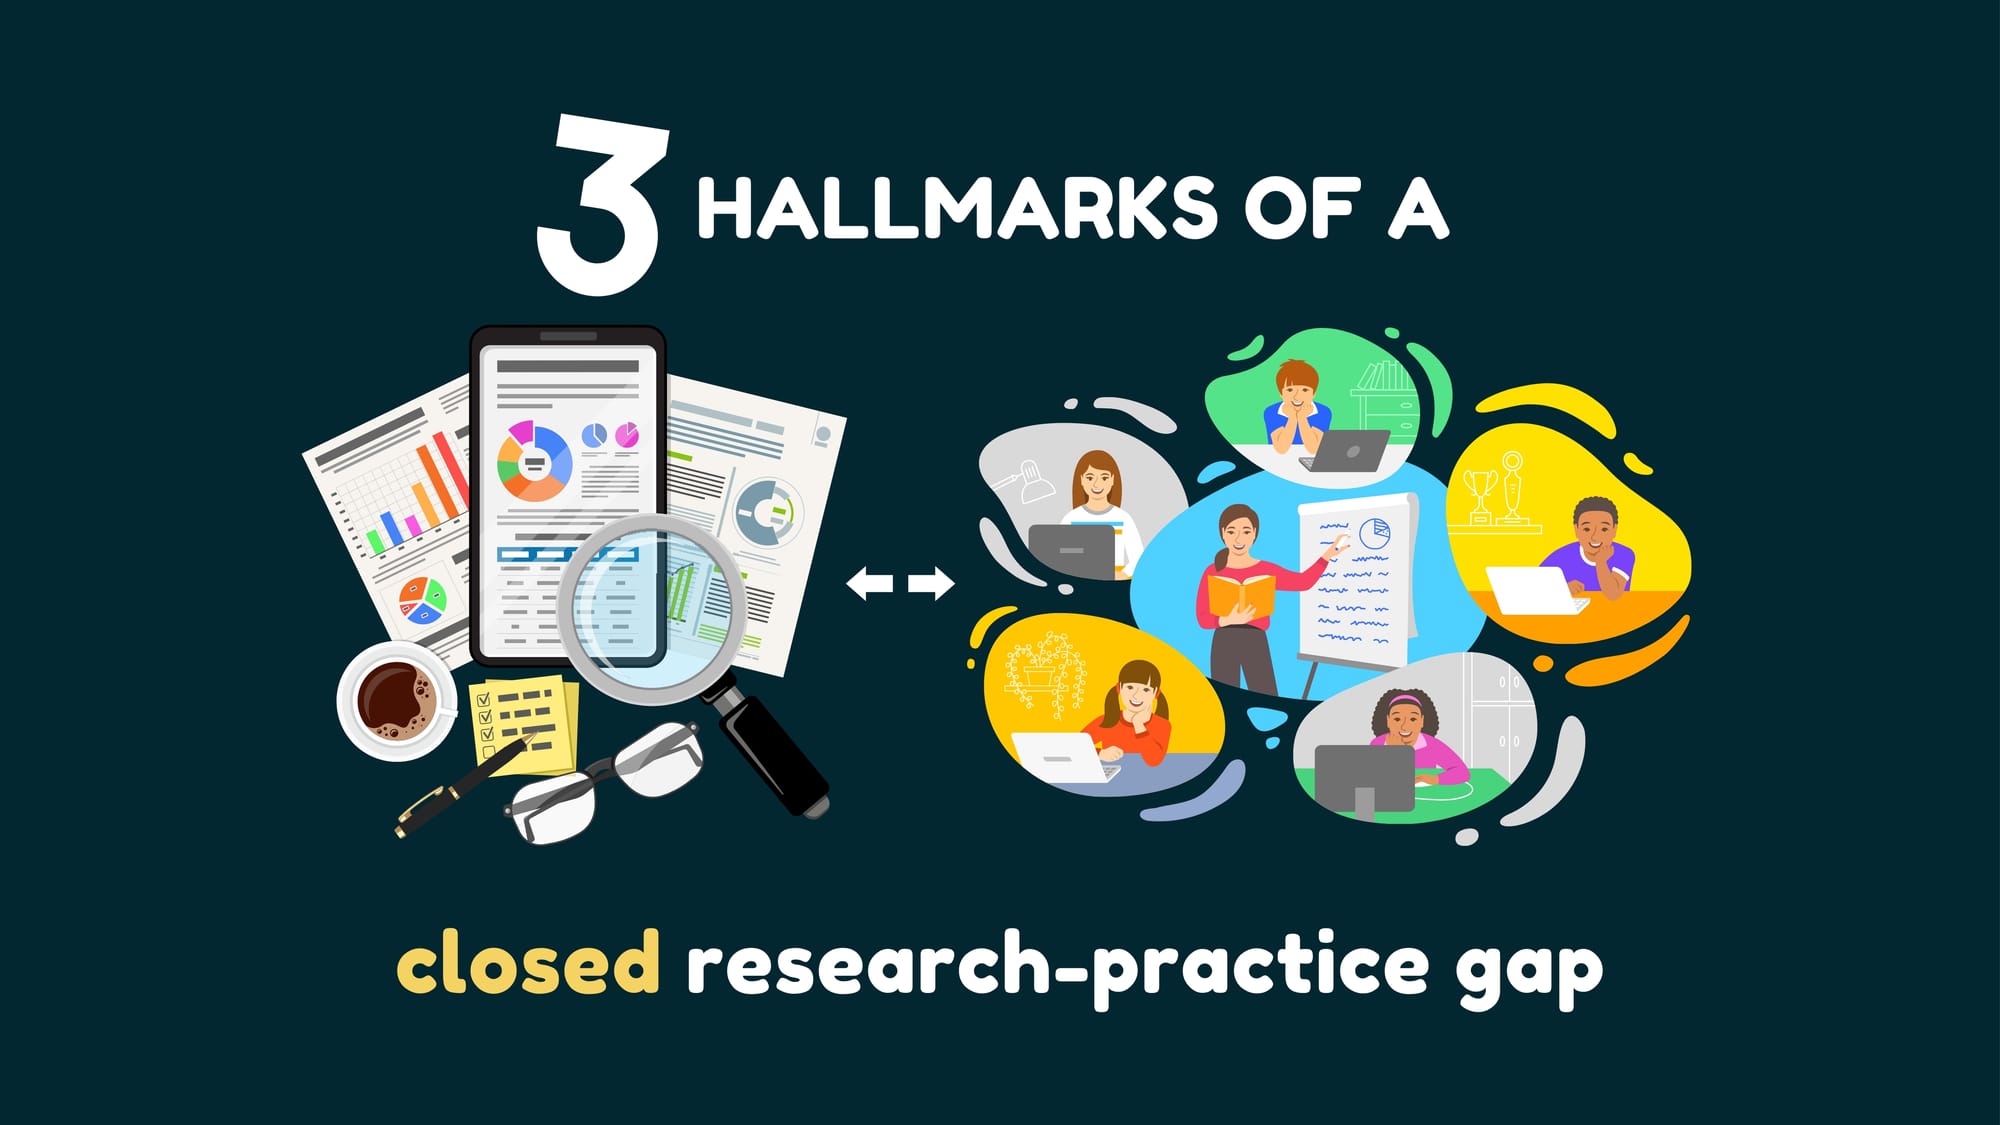 The image lists three hallmarks of a closed research-practice gap. These are listed in the newsletter below.